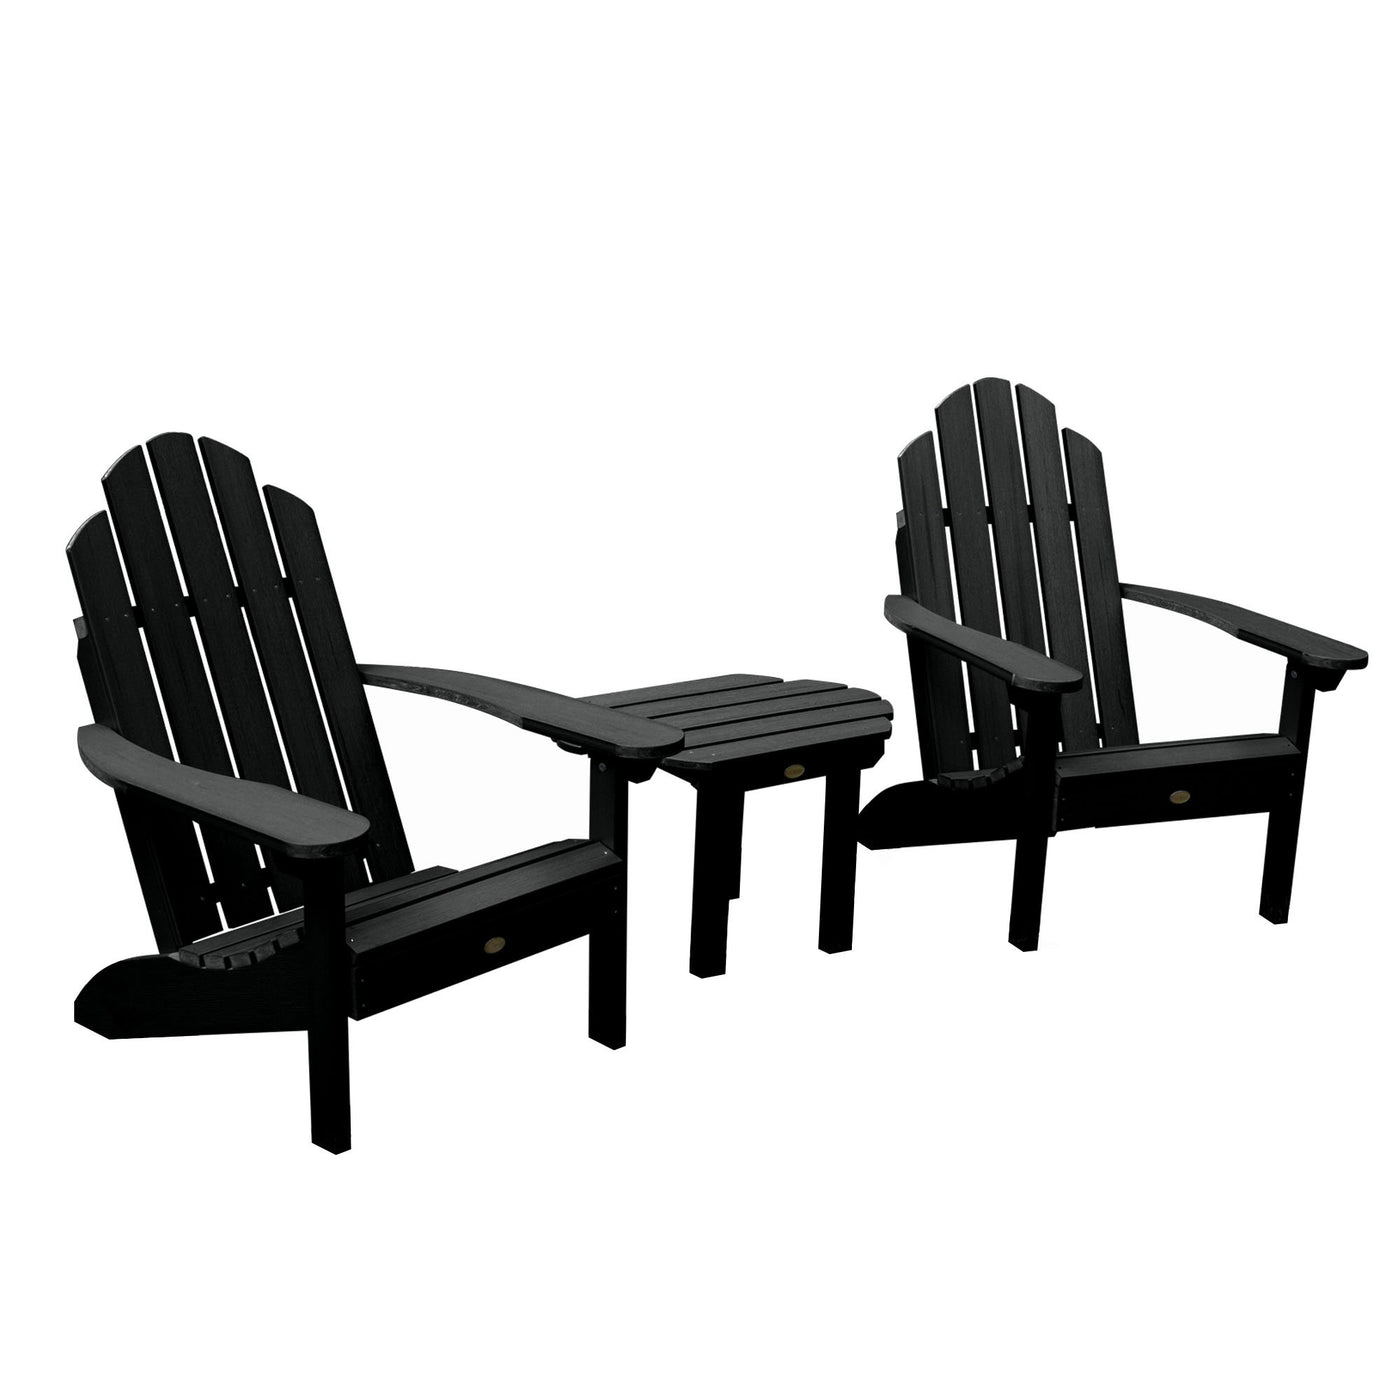 2 Classic Westport Adirondack Chairs with 1 Westport Side Table Highwood USA Black 